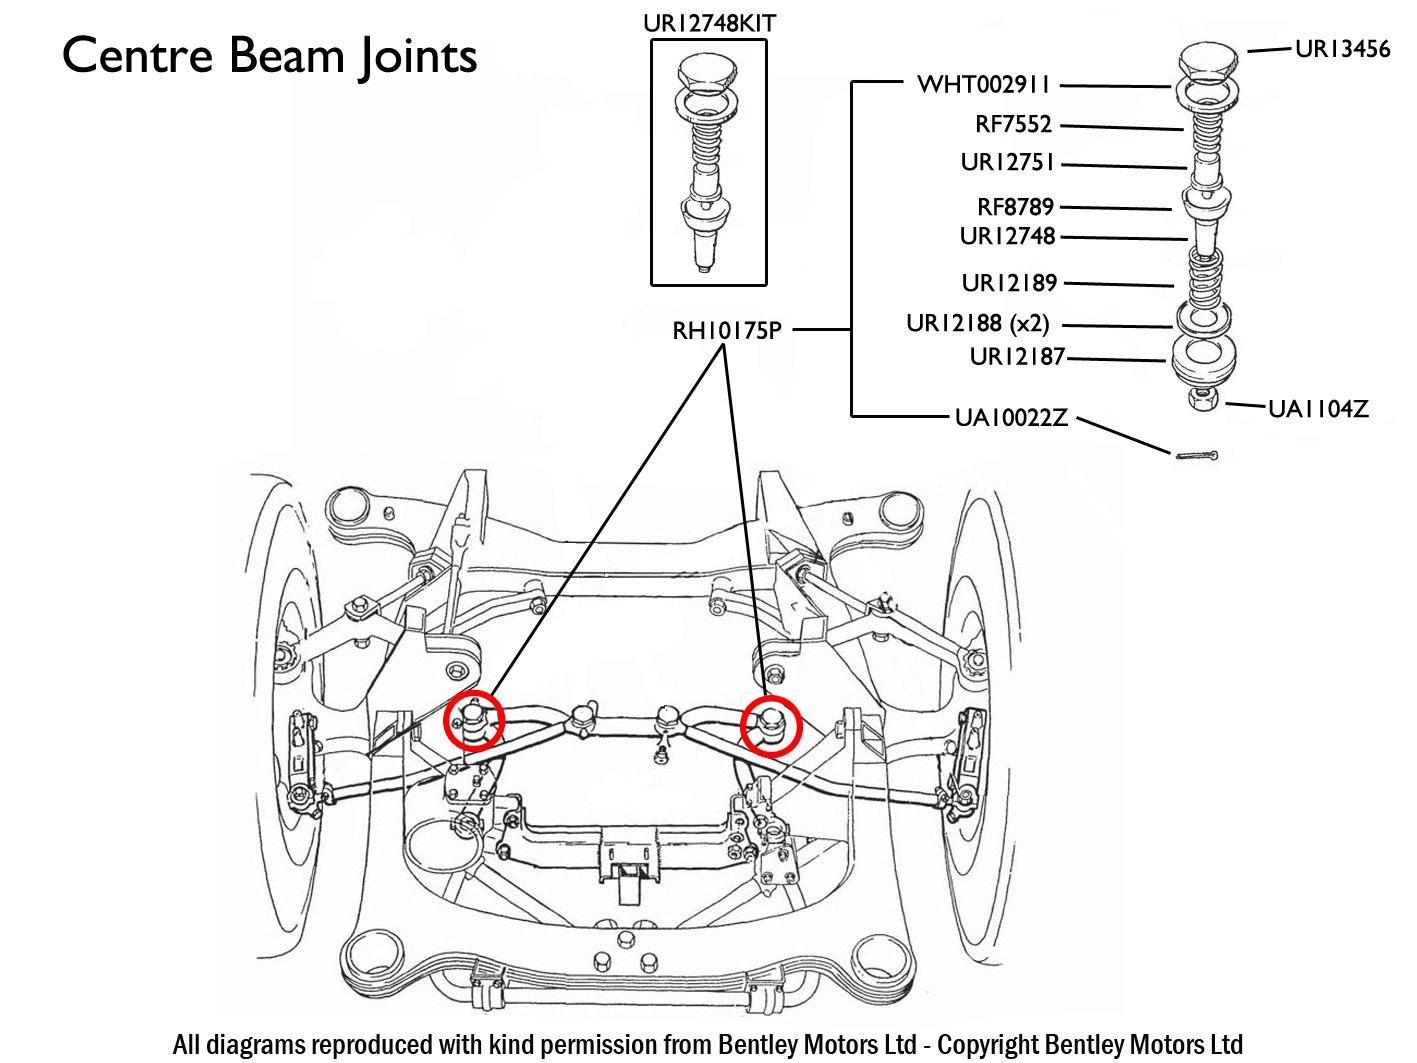 Centre Beam Joint